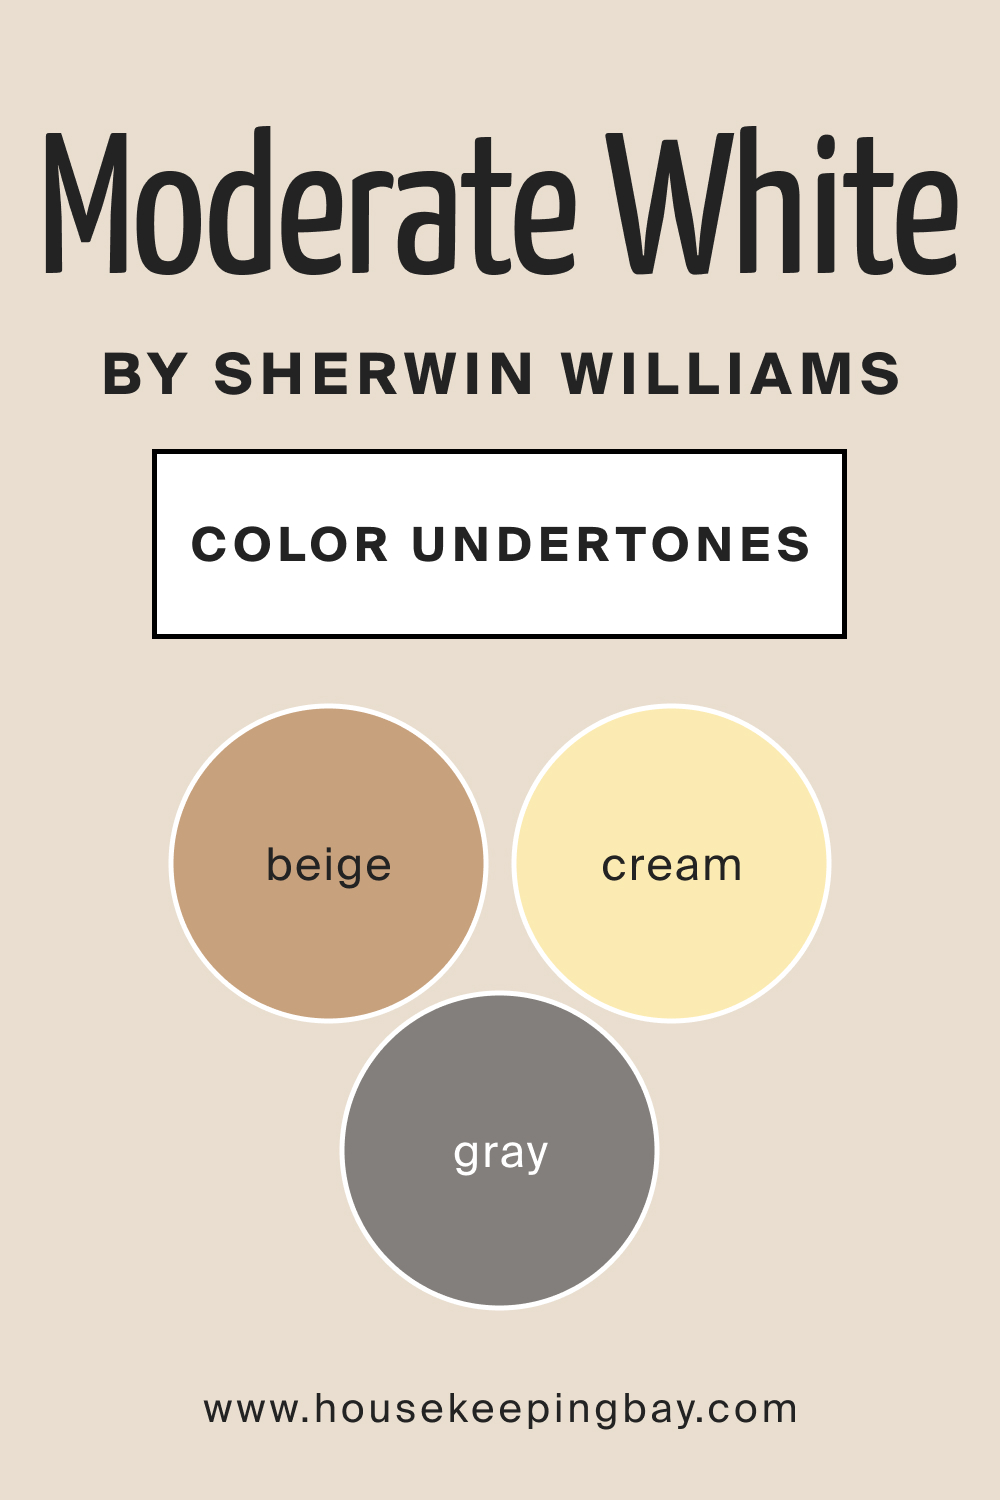 SW Moderate White by Sherwin Williams Main Color Undertone